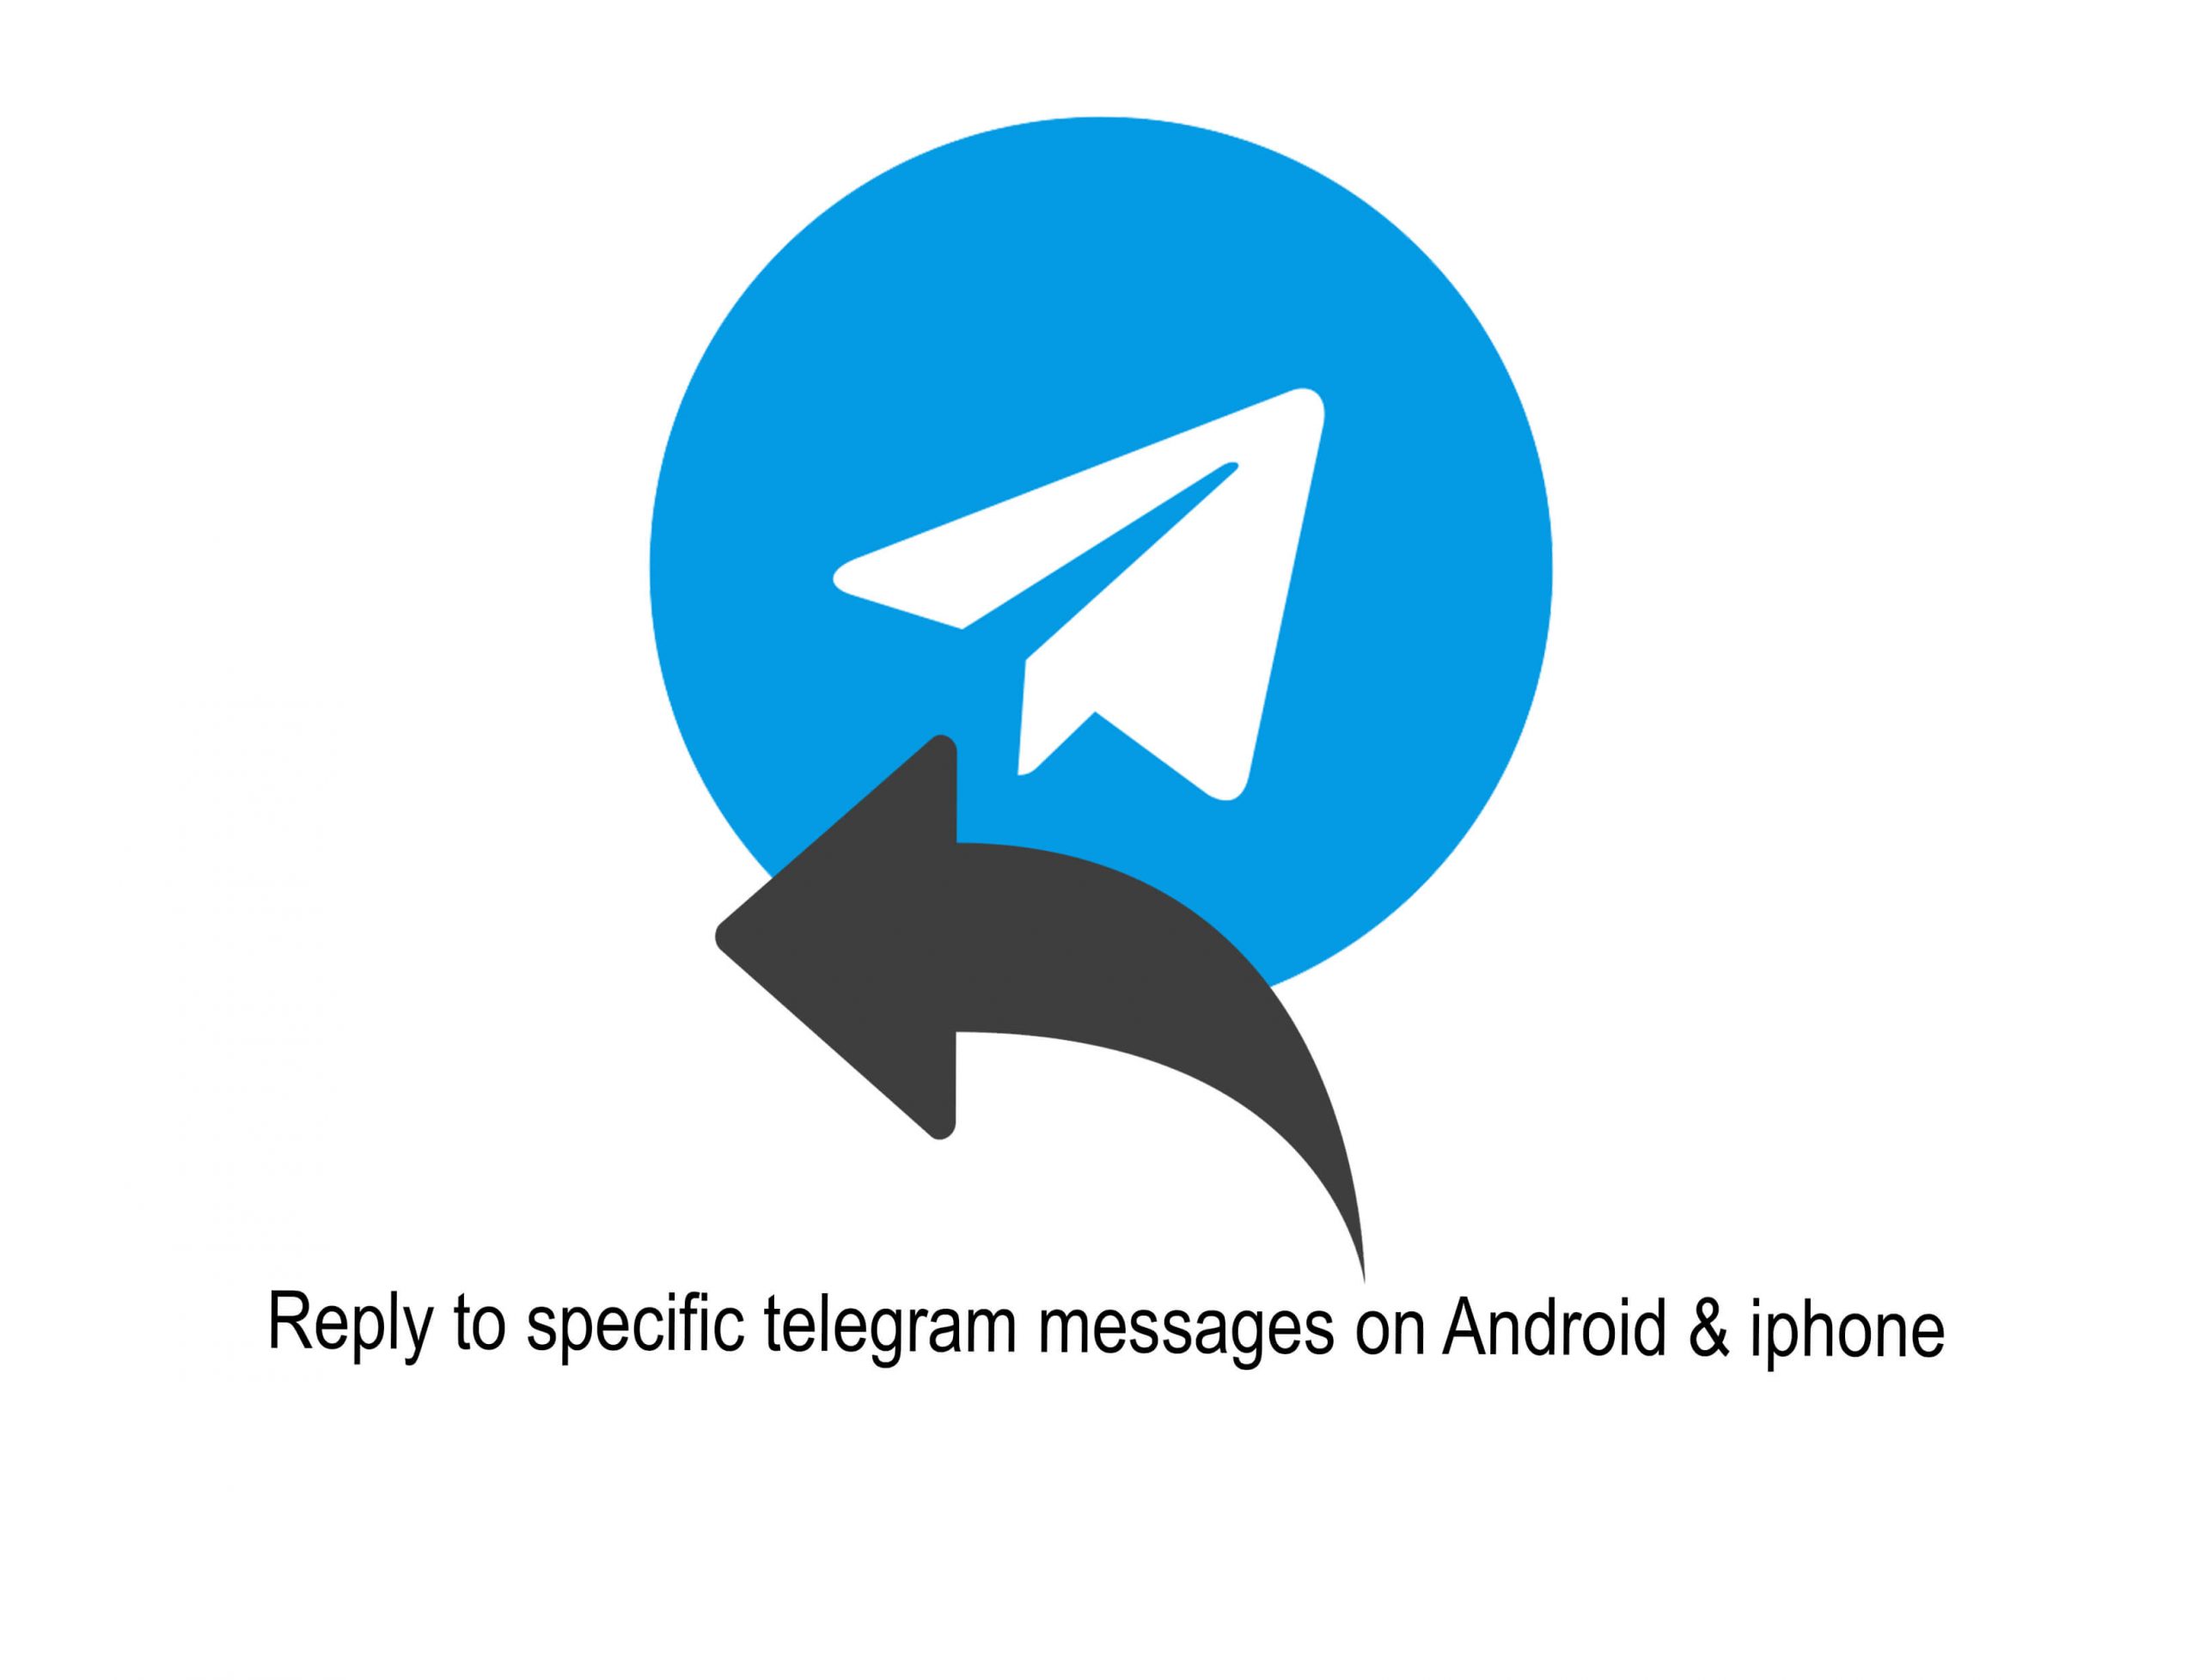 How to Reply to Specific Telegram Messages on Android & iOS in 2 Ways